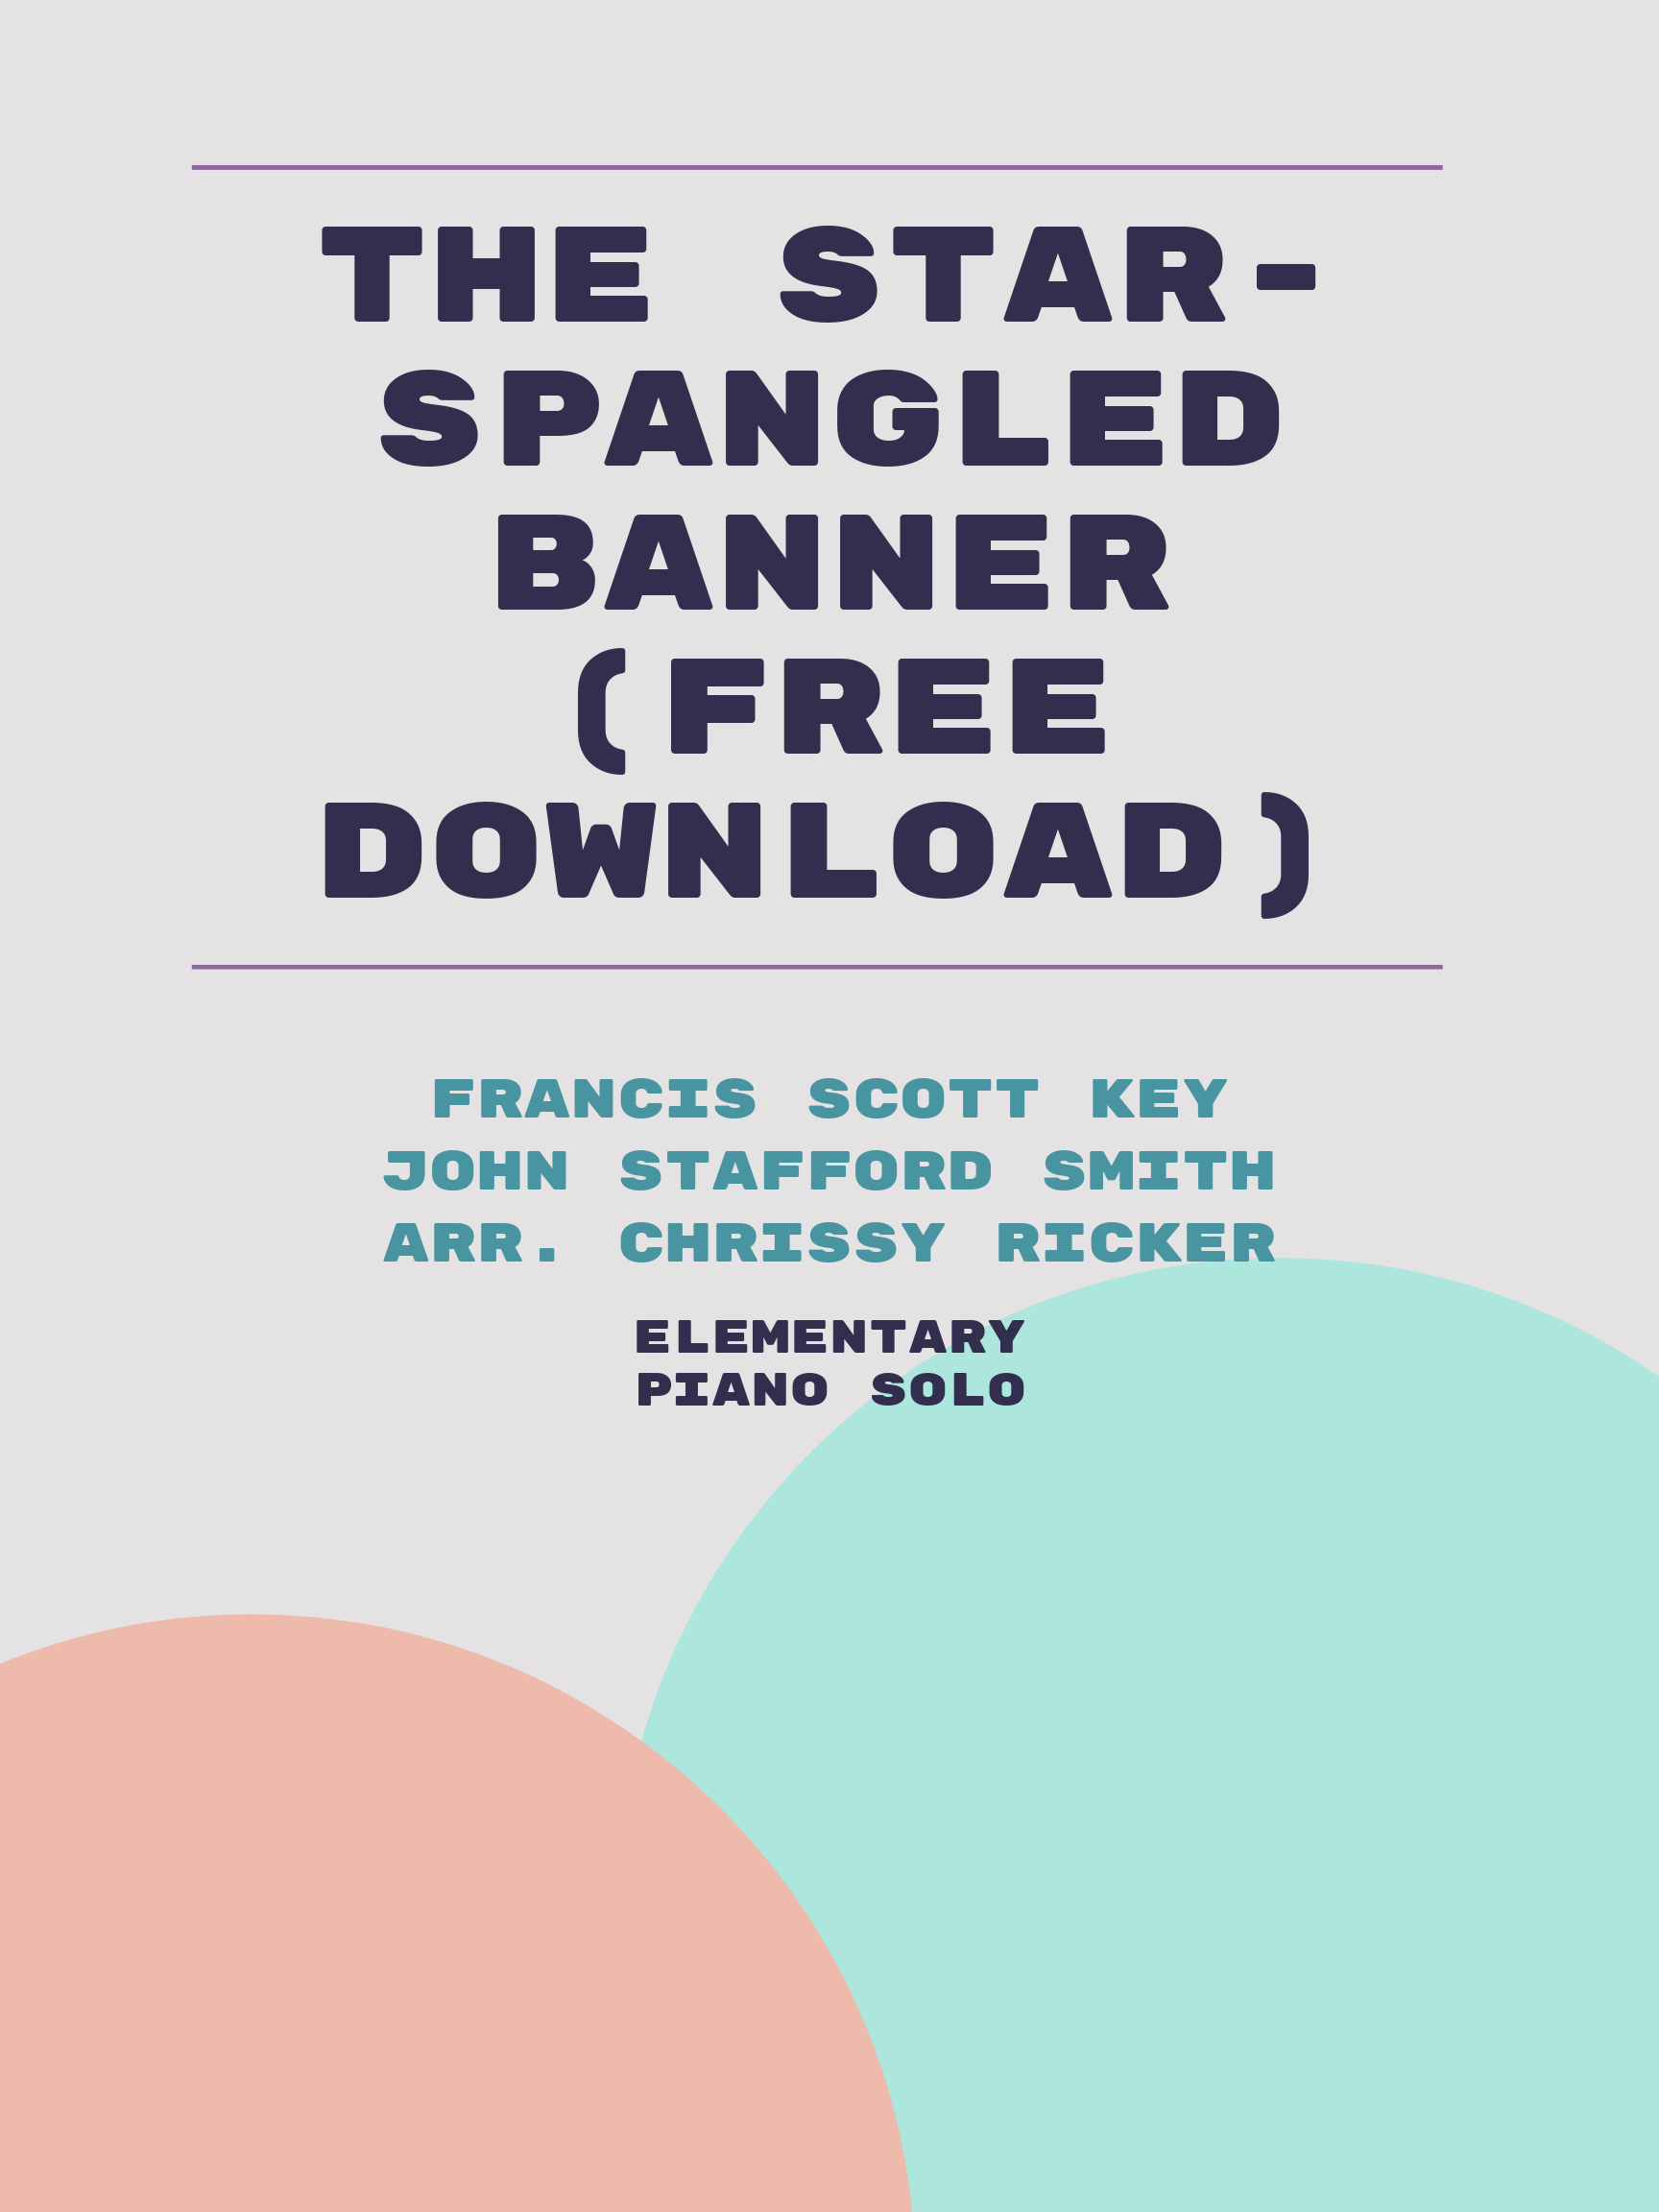 The Star-Spangled Banner (free download) by Francis Scott Key, John Stafford Smith